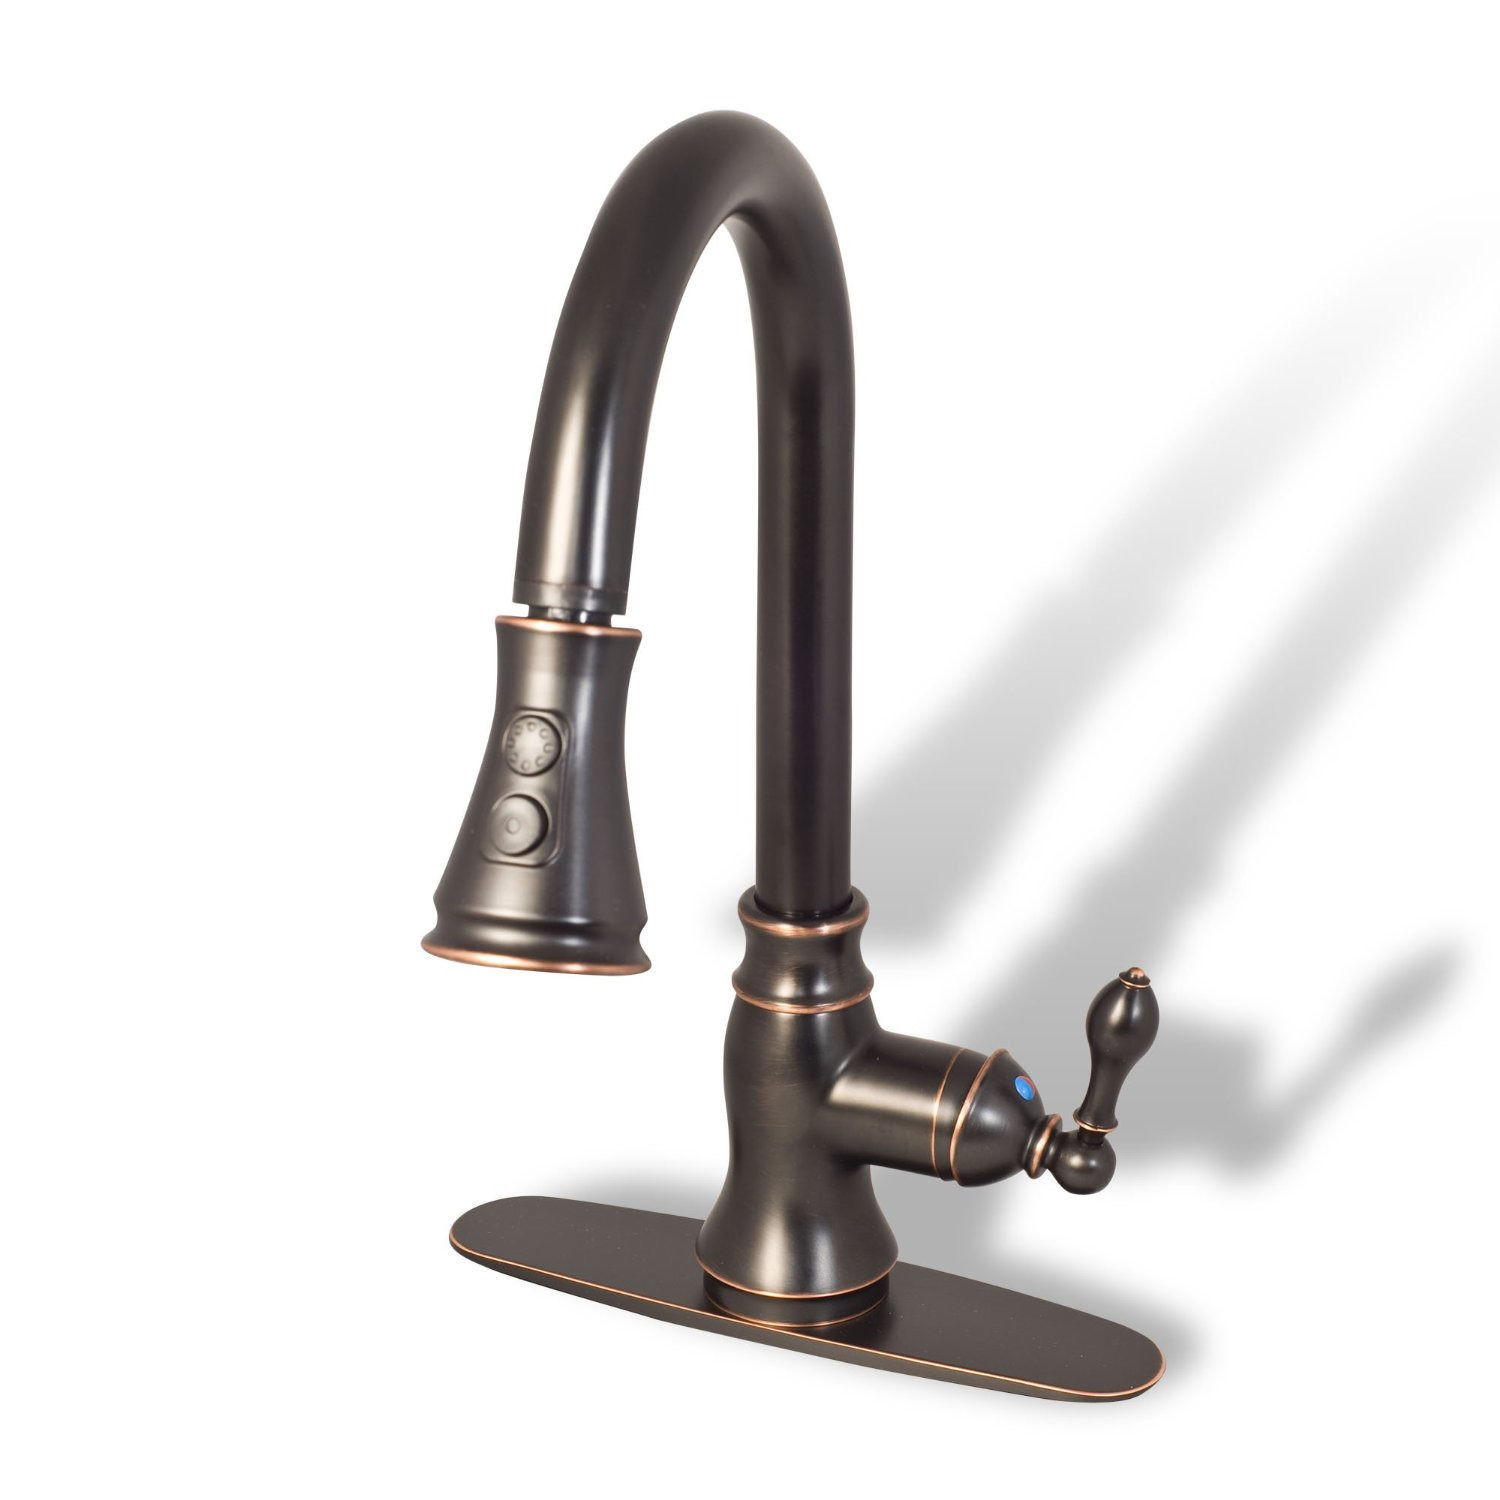 Lowes Bathroom Sinks And Faucets
 Kitchen Choose Your Lovely Lowes Faucets Kitchen To Fit